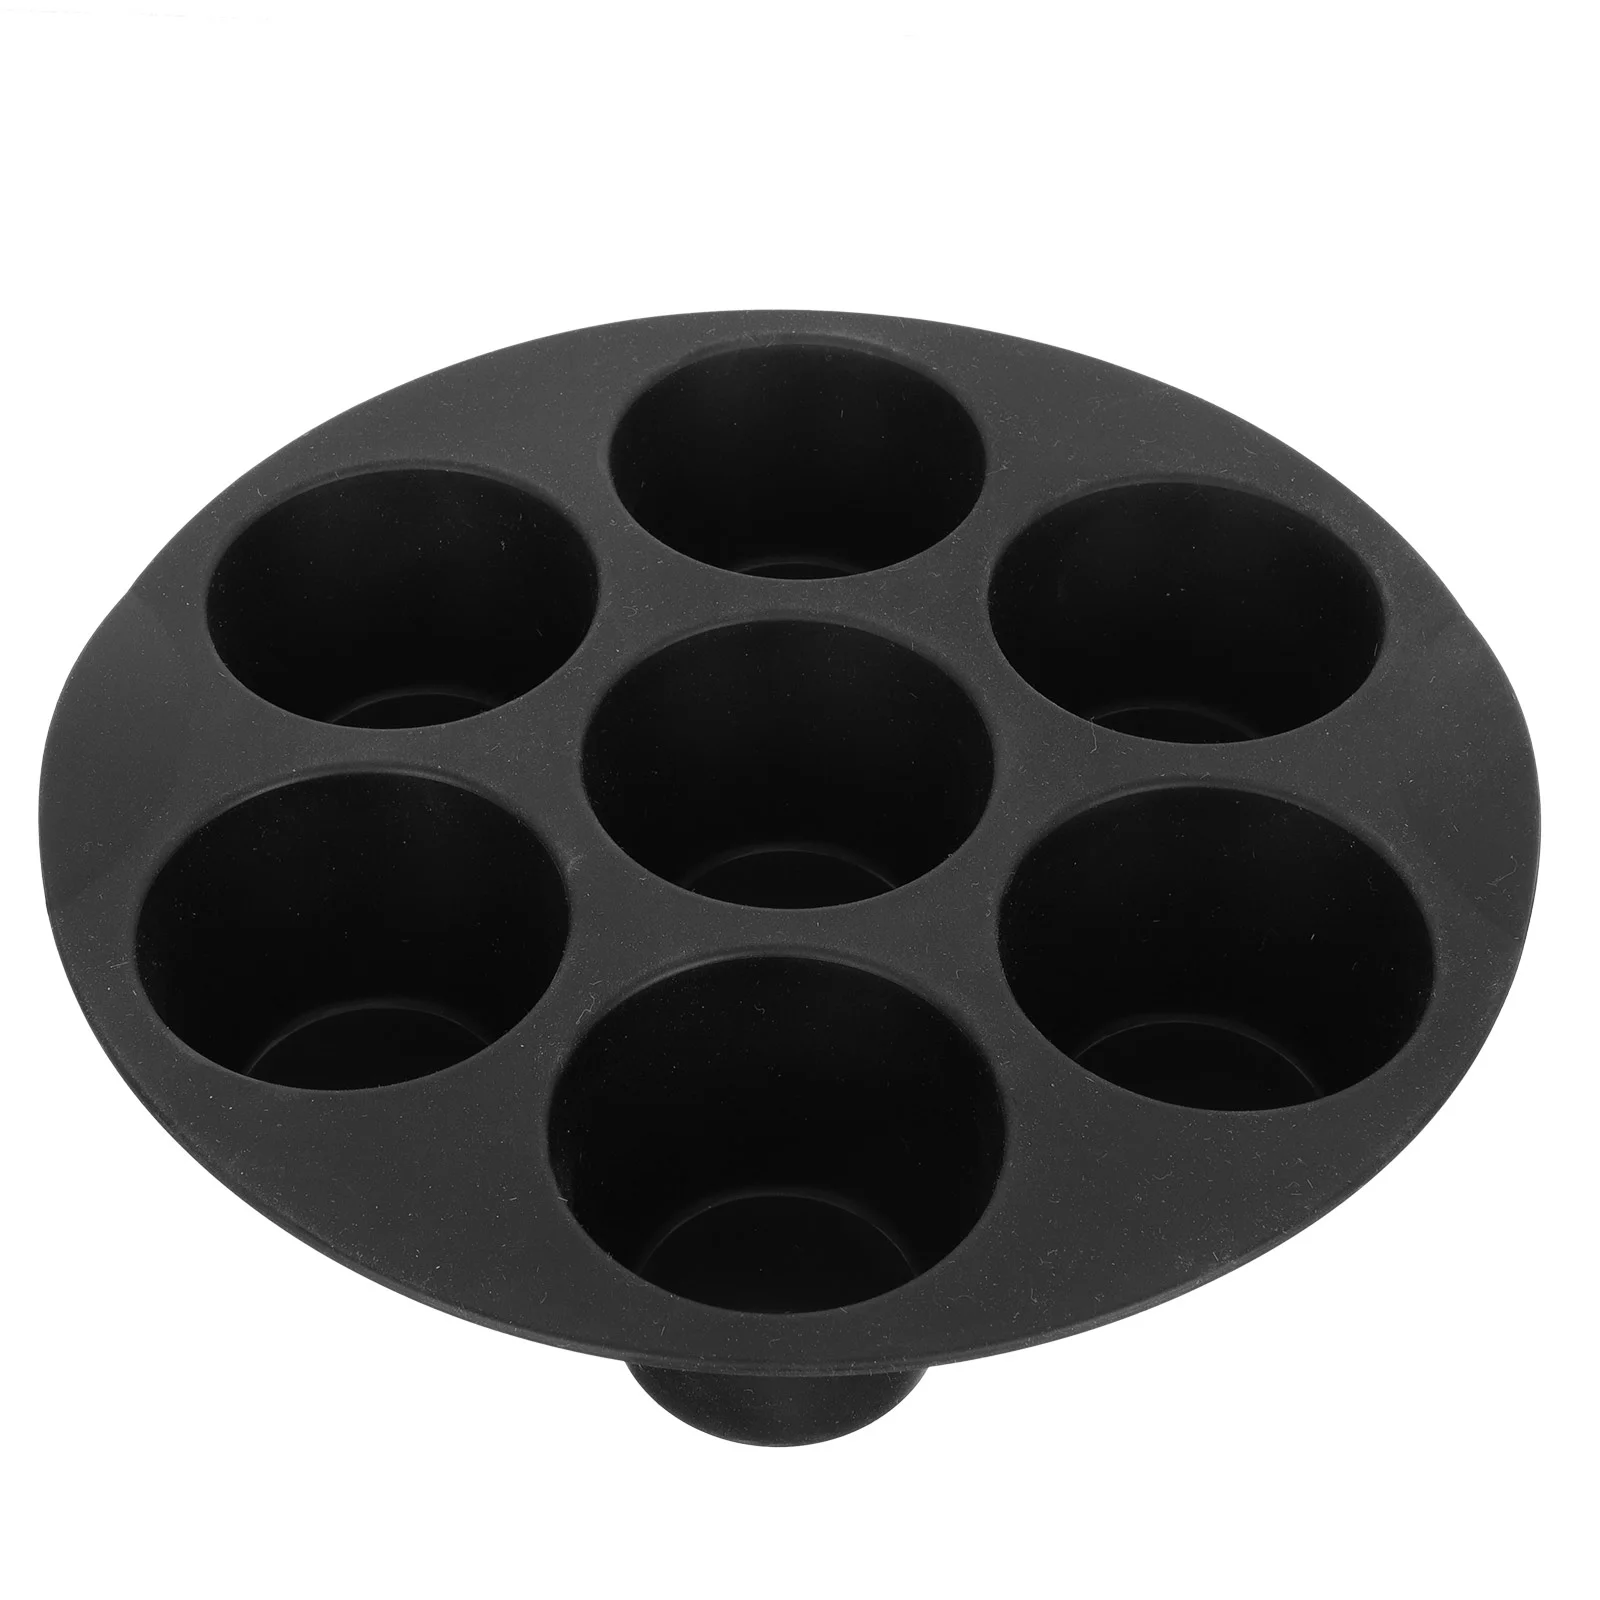 

Baking Pan Muffin Mold Cake Air Fryer Pans Cupcake Tray Silicone Moulds Holes Non Stick Egg Chocolate Accessories Mini Cookie